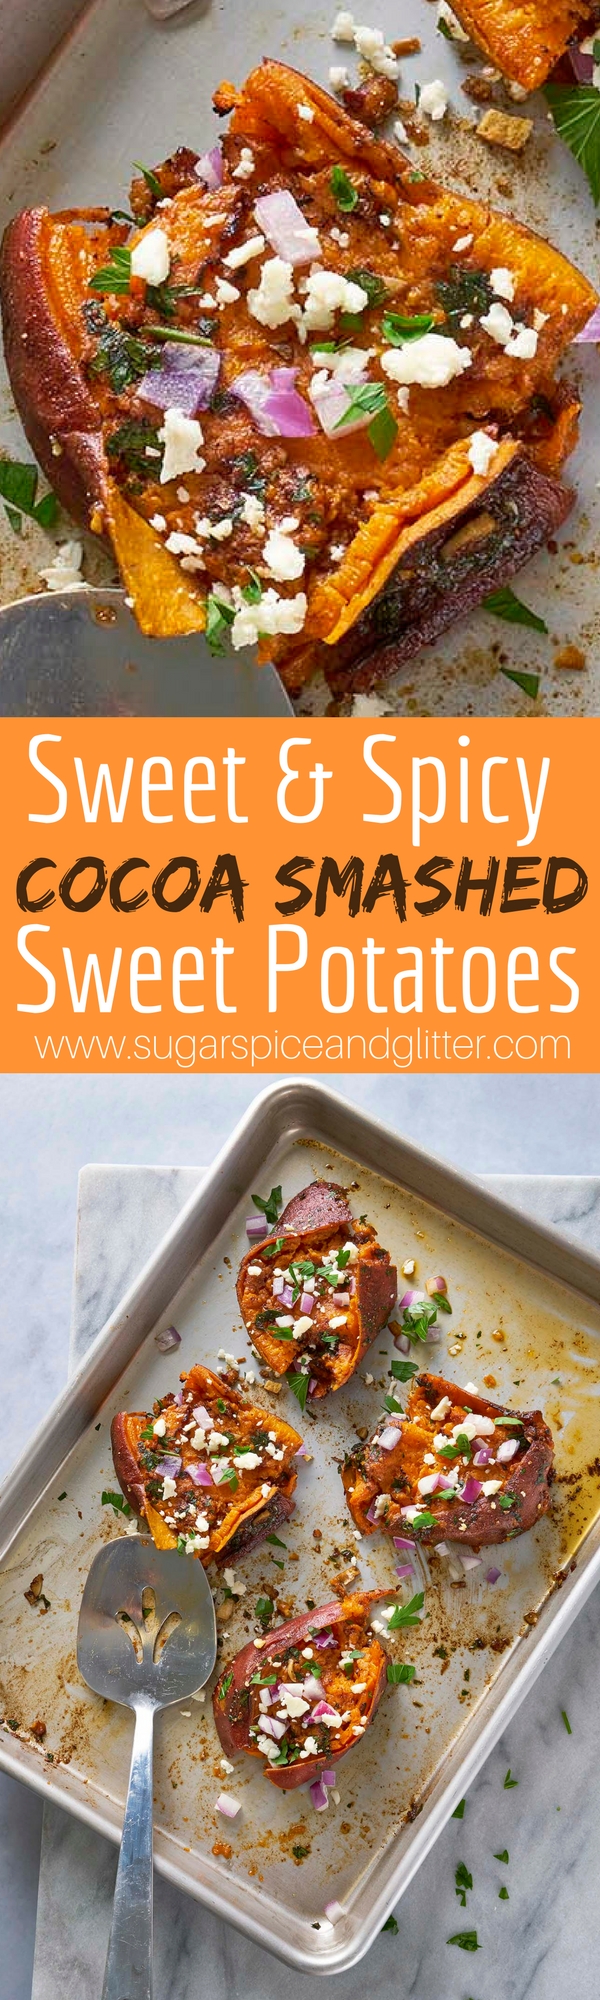 This Sweet and Spicy Smashed Sweet Potato Recipe has an unexpected flavor in the mix- chocolate! A savoury chocolate recipe inspired by the Chocolate Emporium at Universal Studios Florida